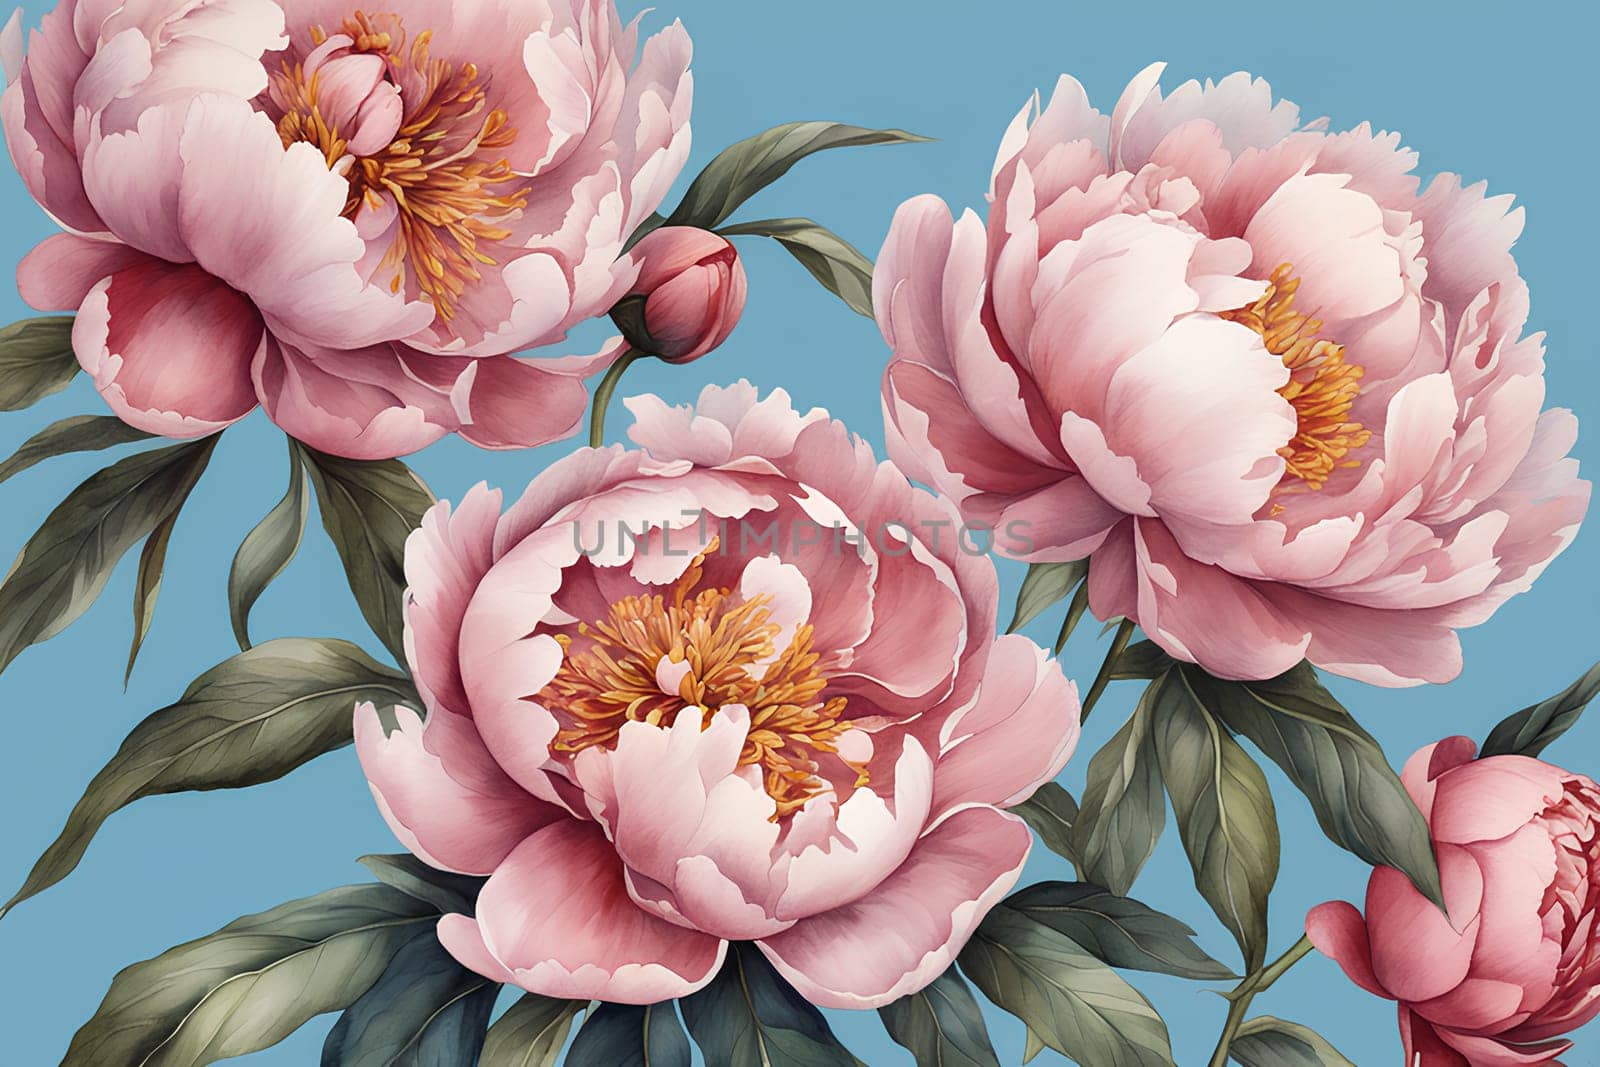 Watercolor peony flowers on blue background by Annu1tochka